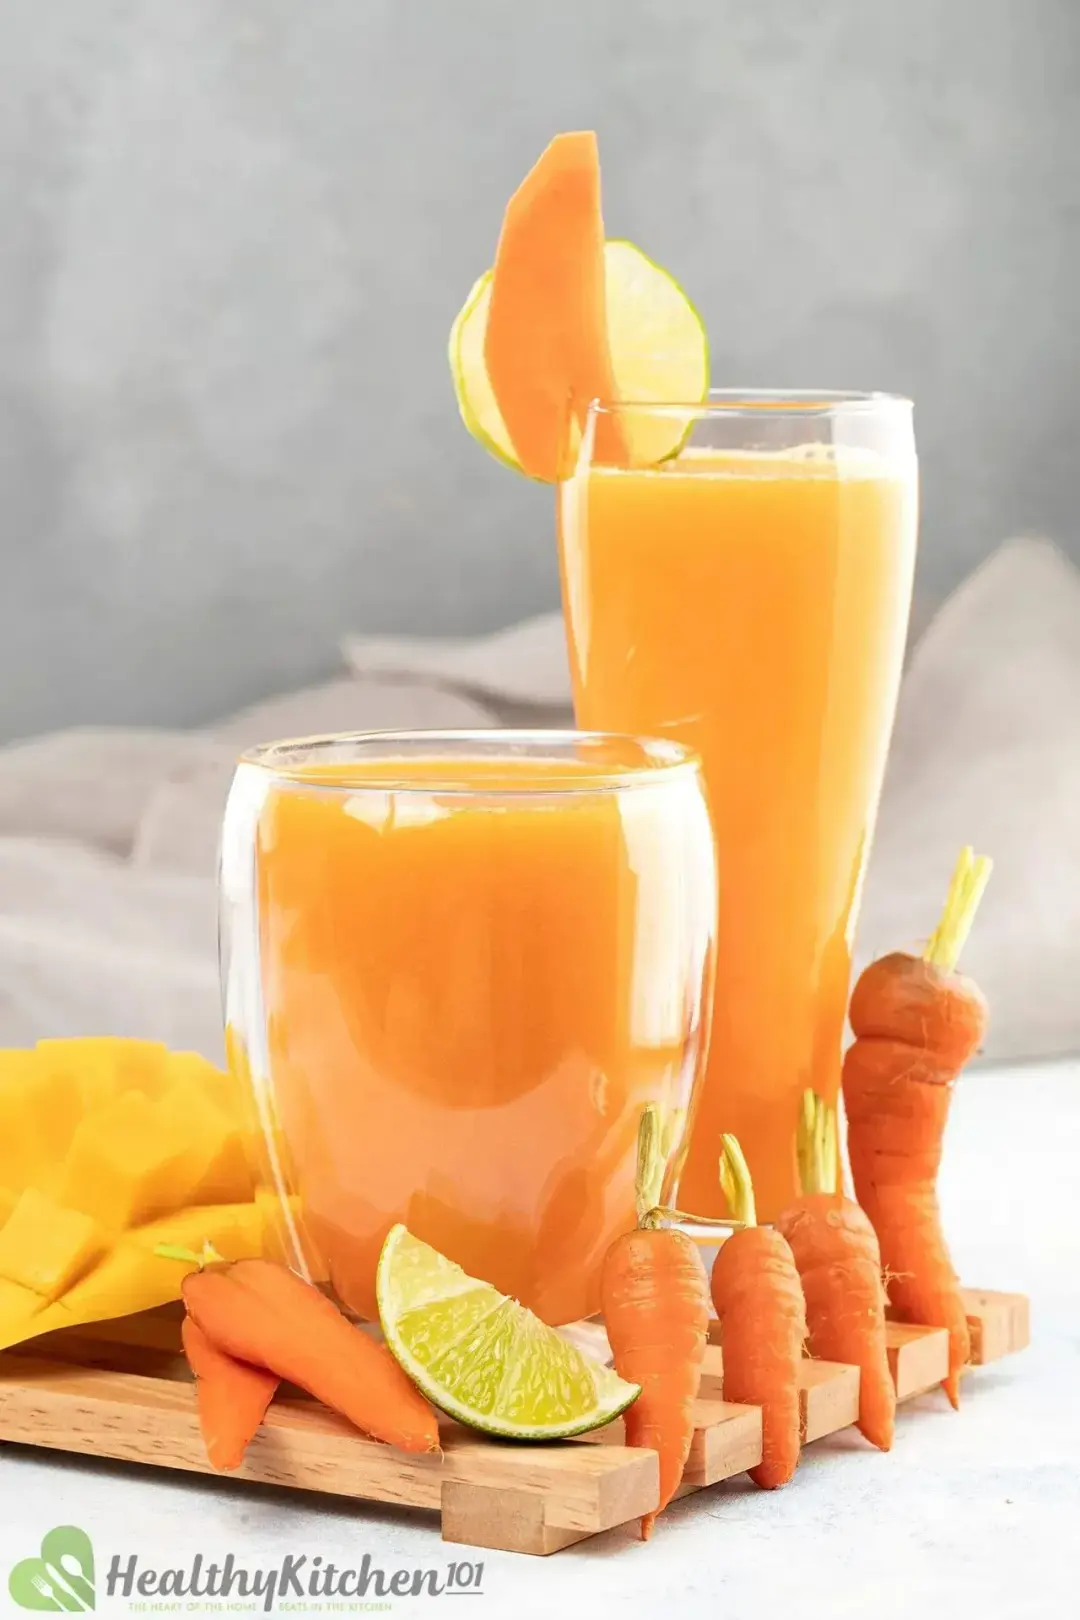 Two glasses of carrot smoothie, one tall and one short, put next to a lime wedge and many baby carrots